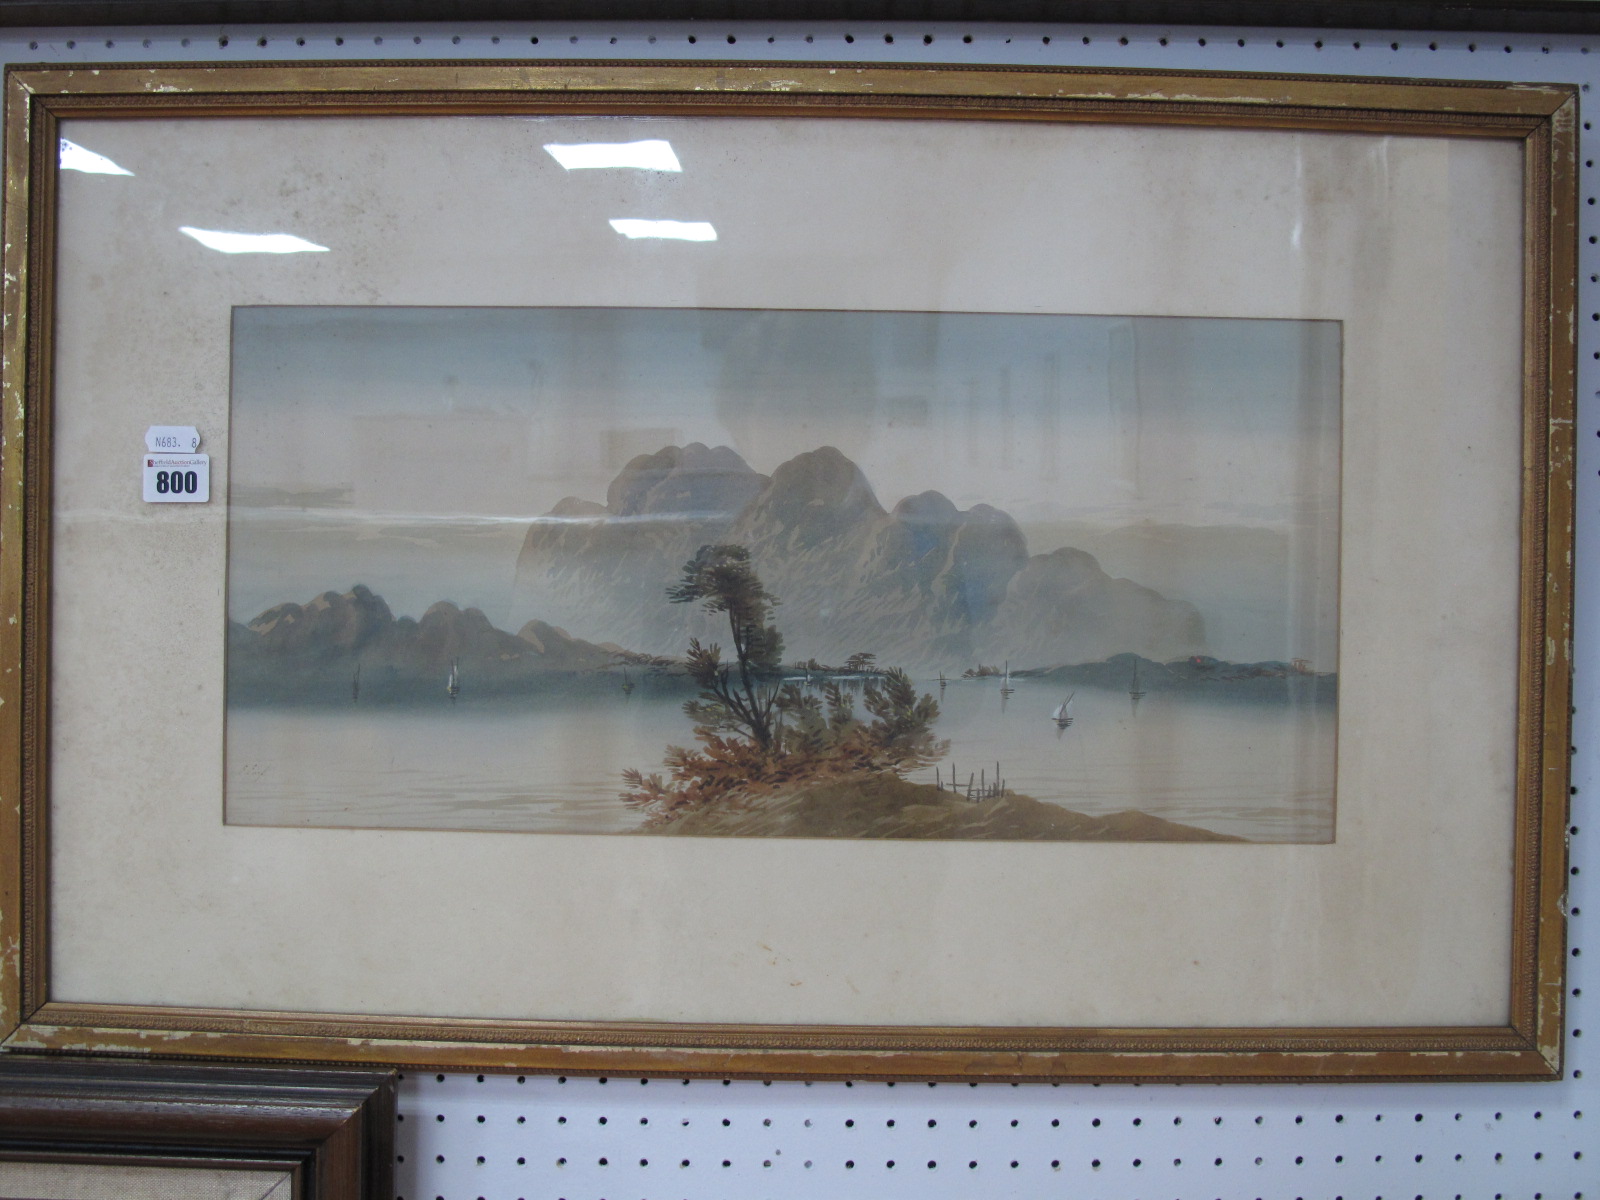 E. Earp, Shipping in Tranquil Waters, with distant mountains, watercolour, 23.5 x 50.5cm, signed